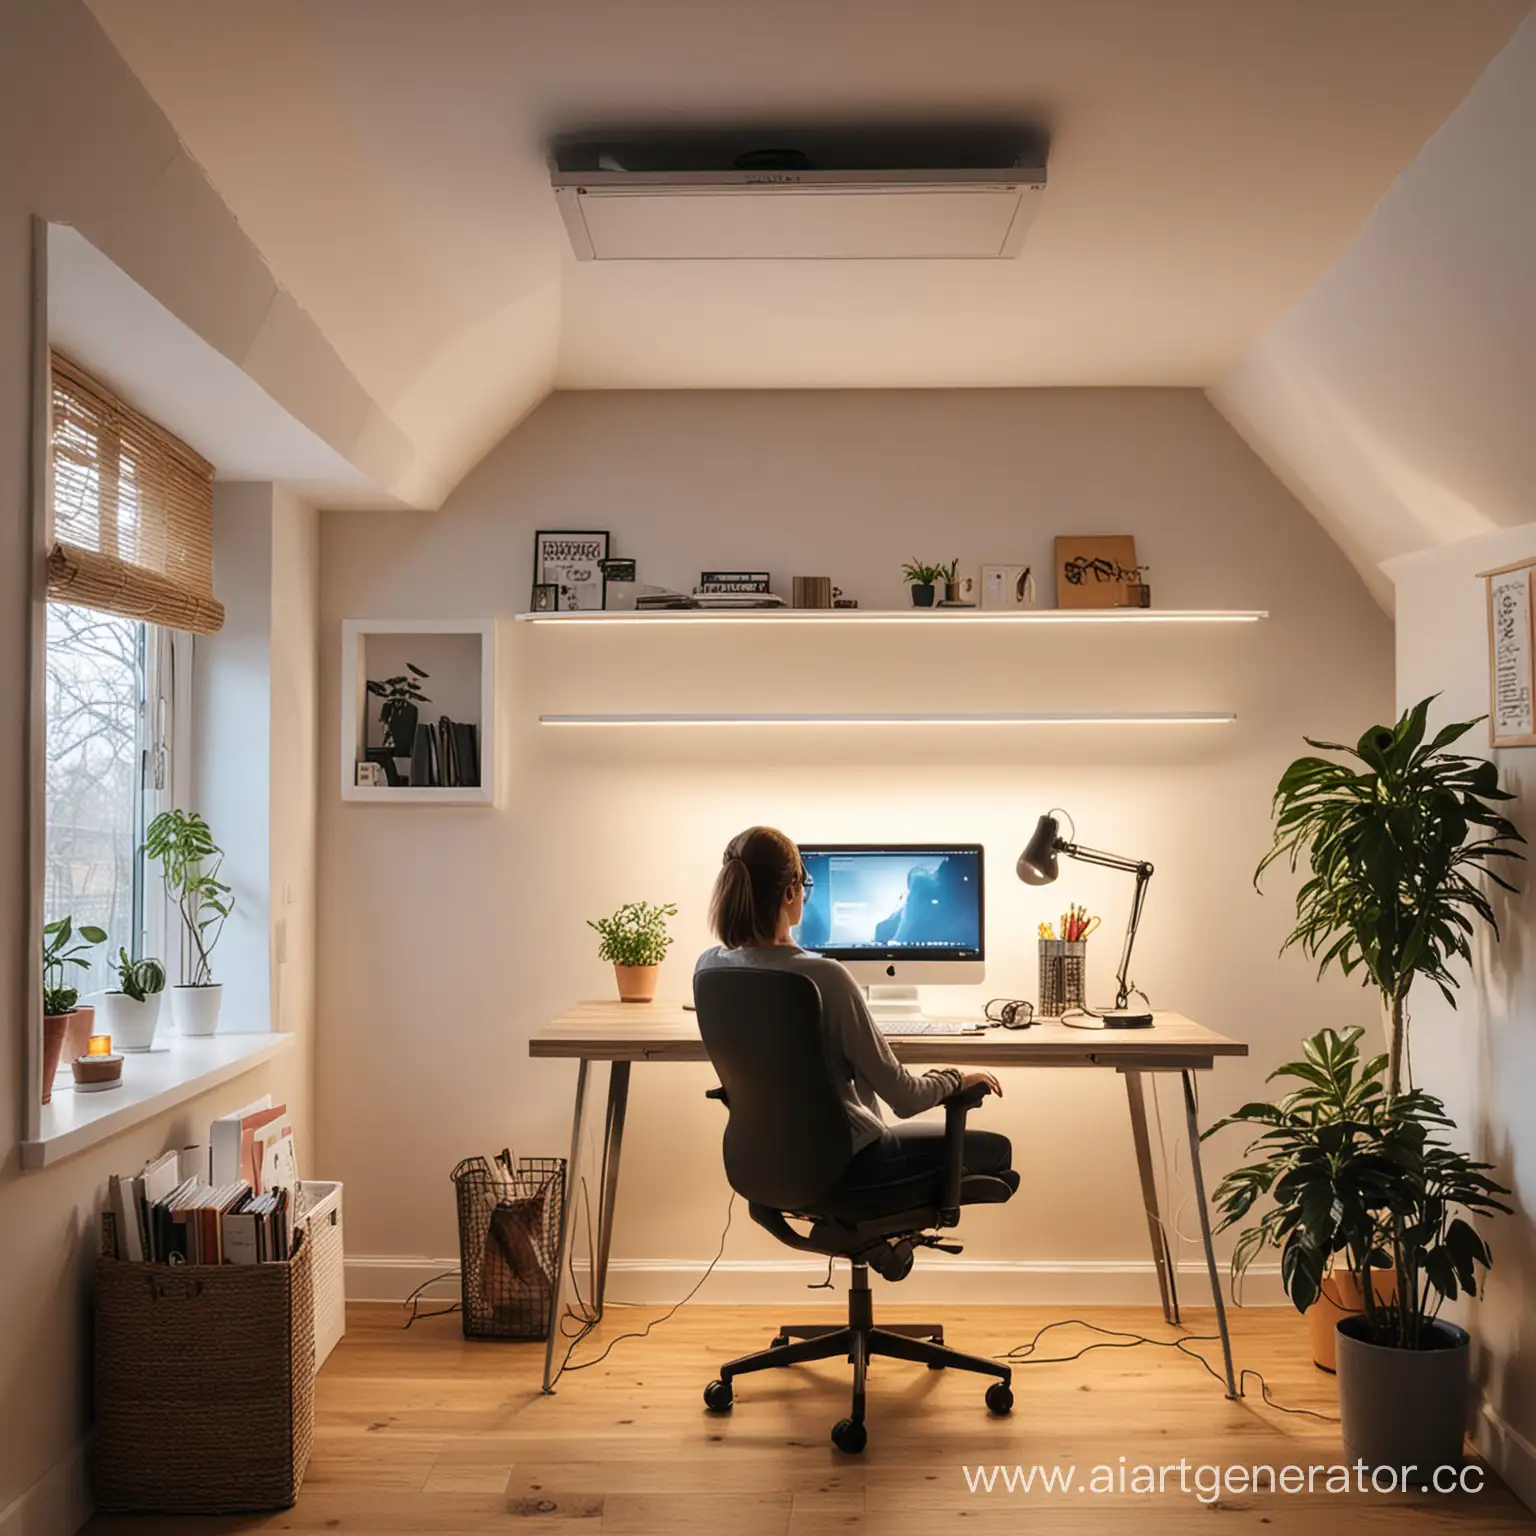 Freelancer-Working-from-Home-at-Computer-Desk-with-Suspended-Ceiling-Lighting